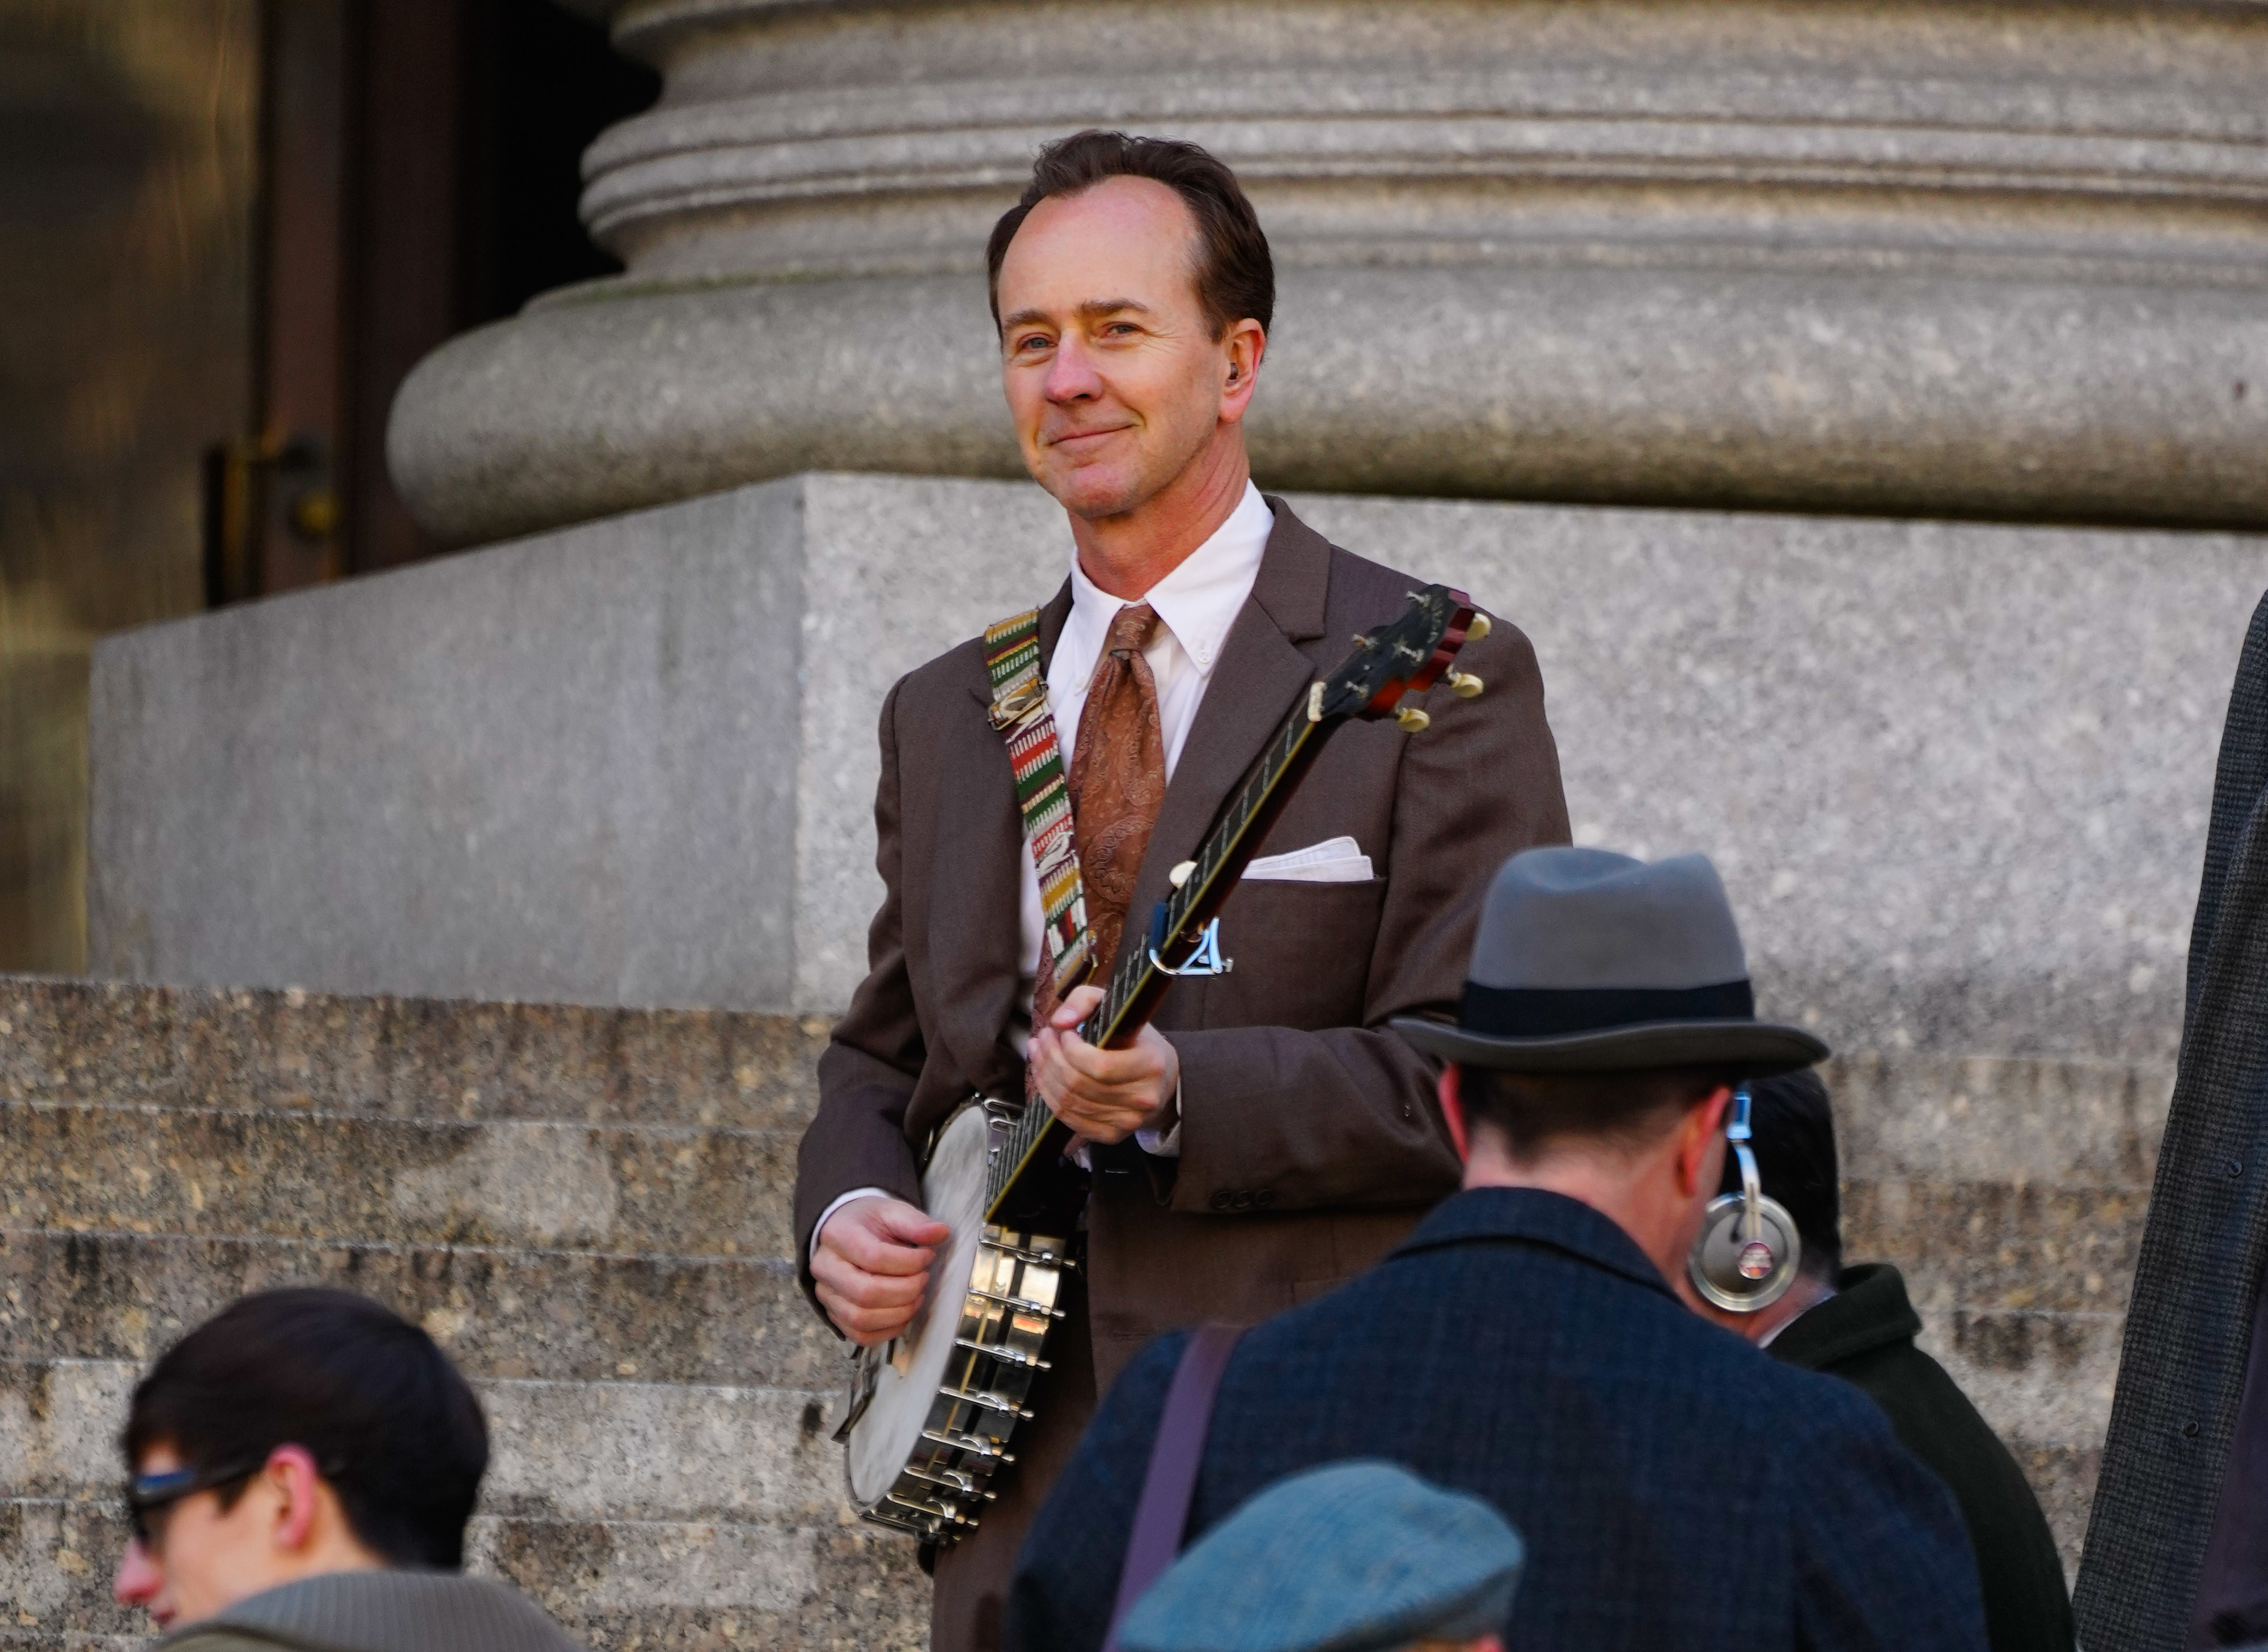 Edward in a suit holding a banjo with other people nearby